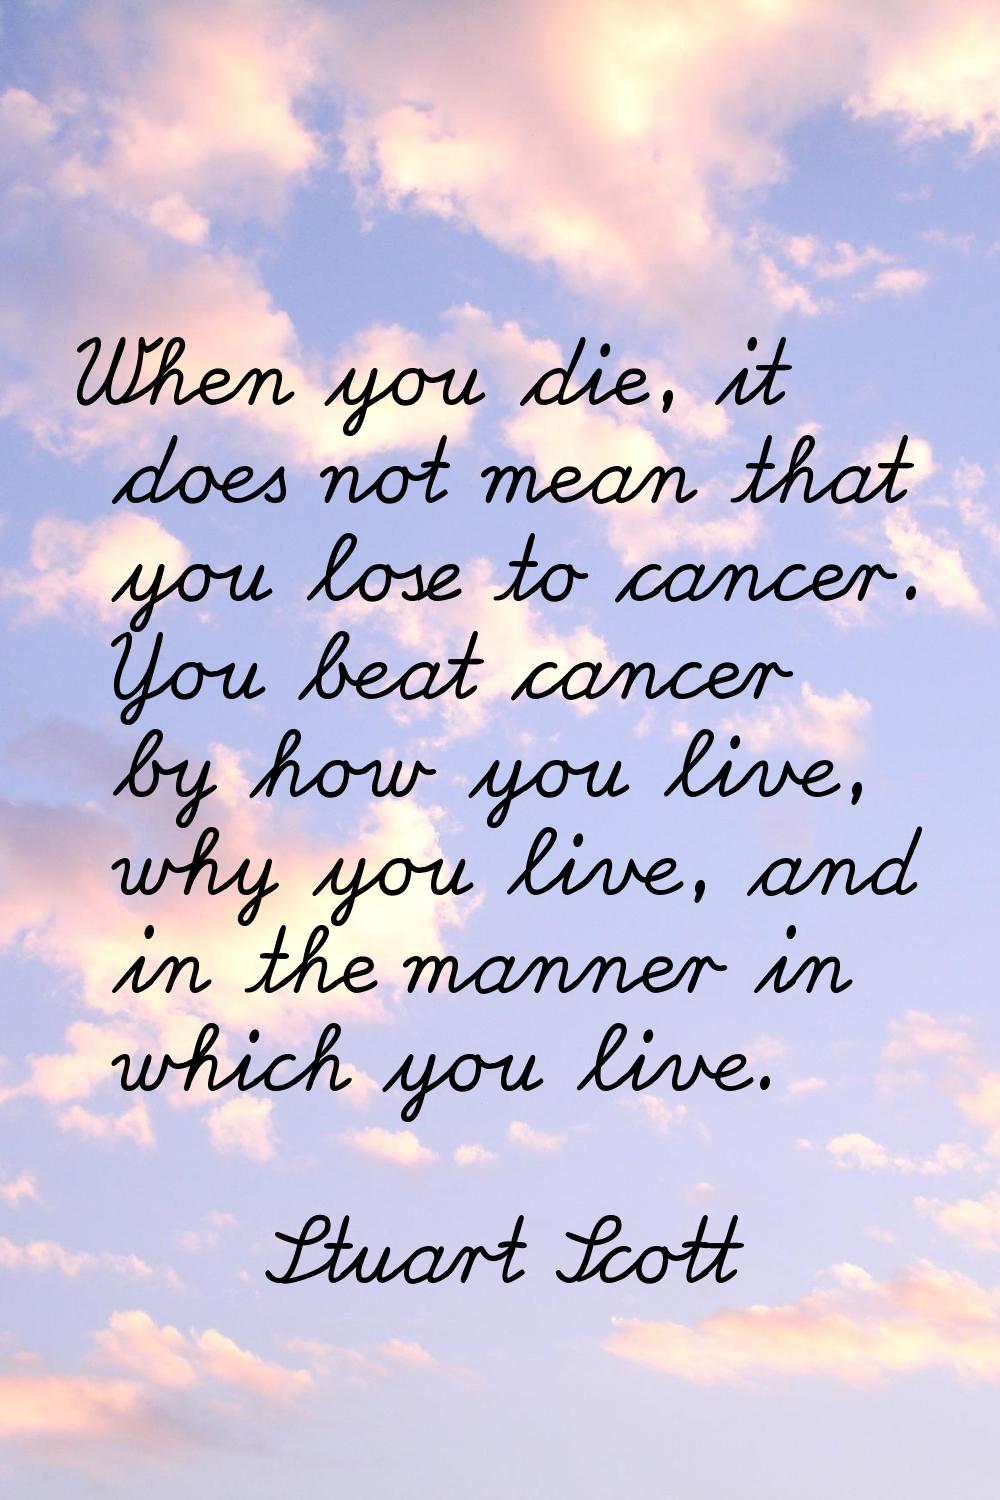 When you die, it does not mean that you lose to cancer. You beat cancer by how you live, why you li